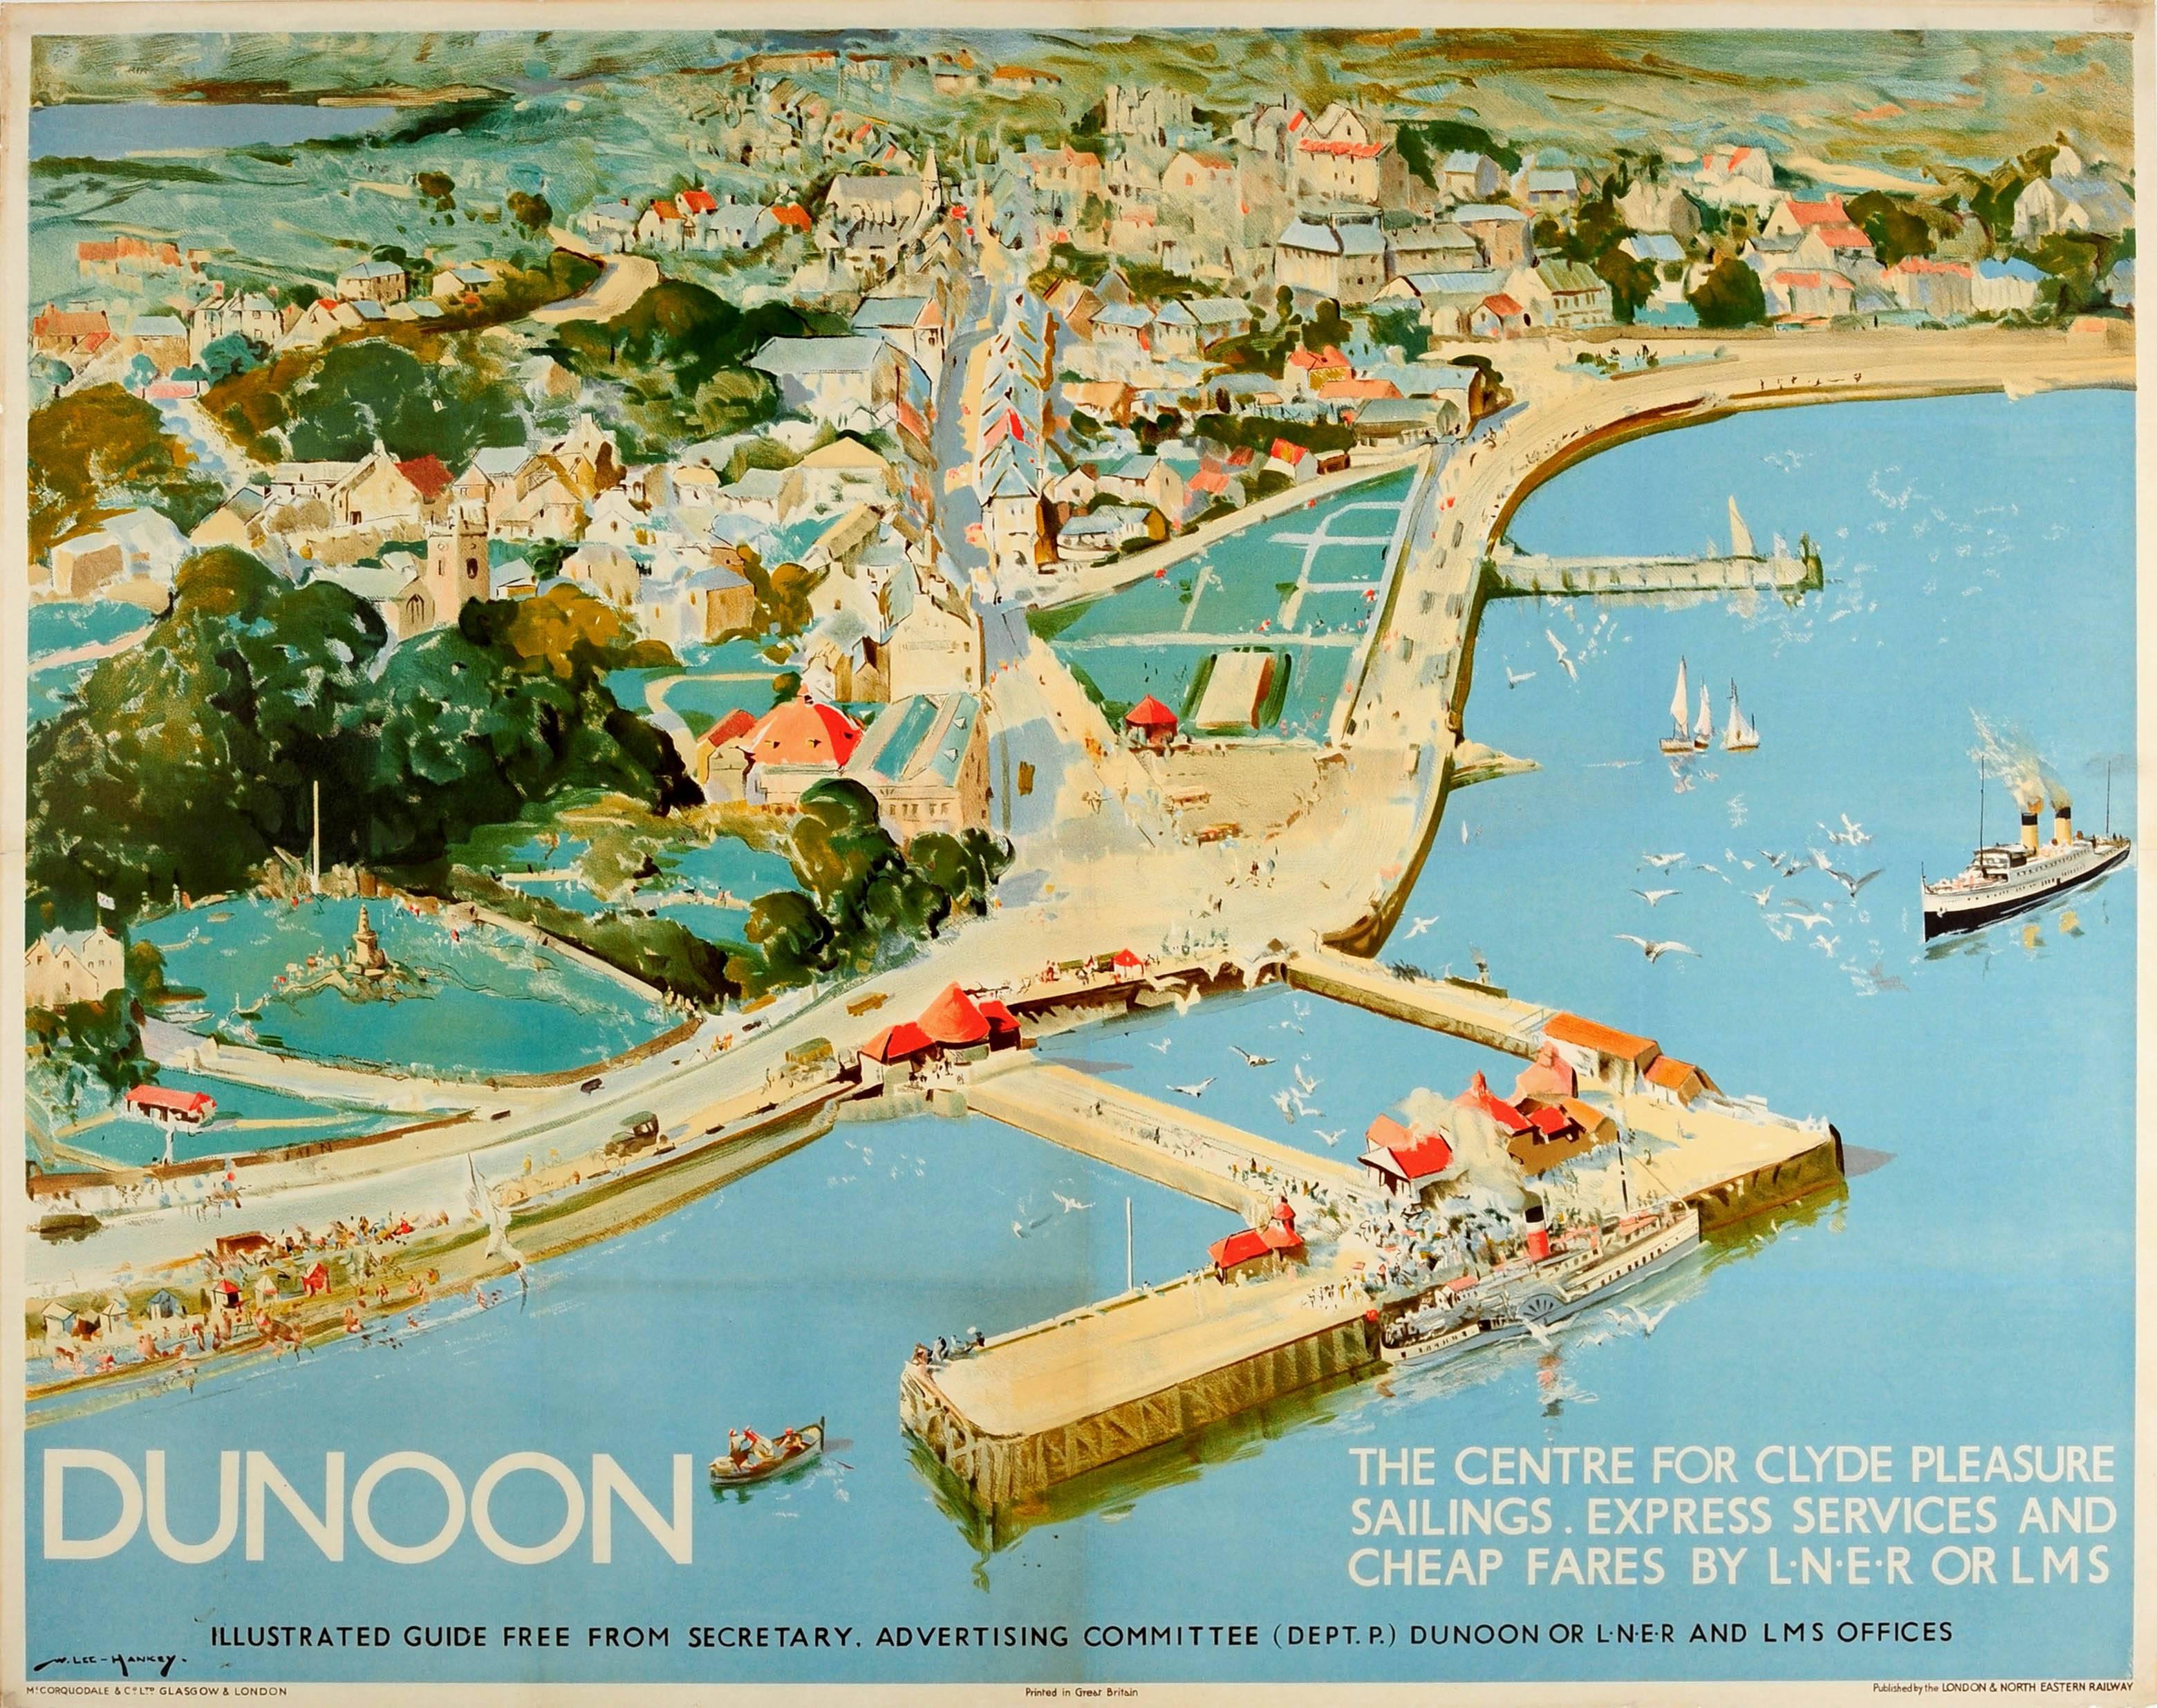 William Lee Hankey Print - Original London & North Eastern Railway LNER LMS Poster For Dunoon On The Clyde